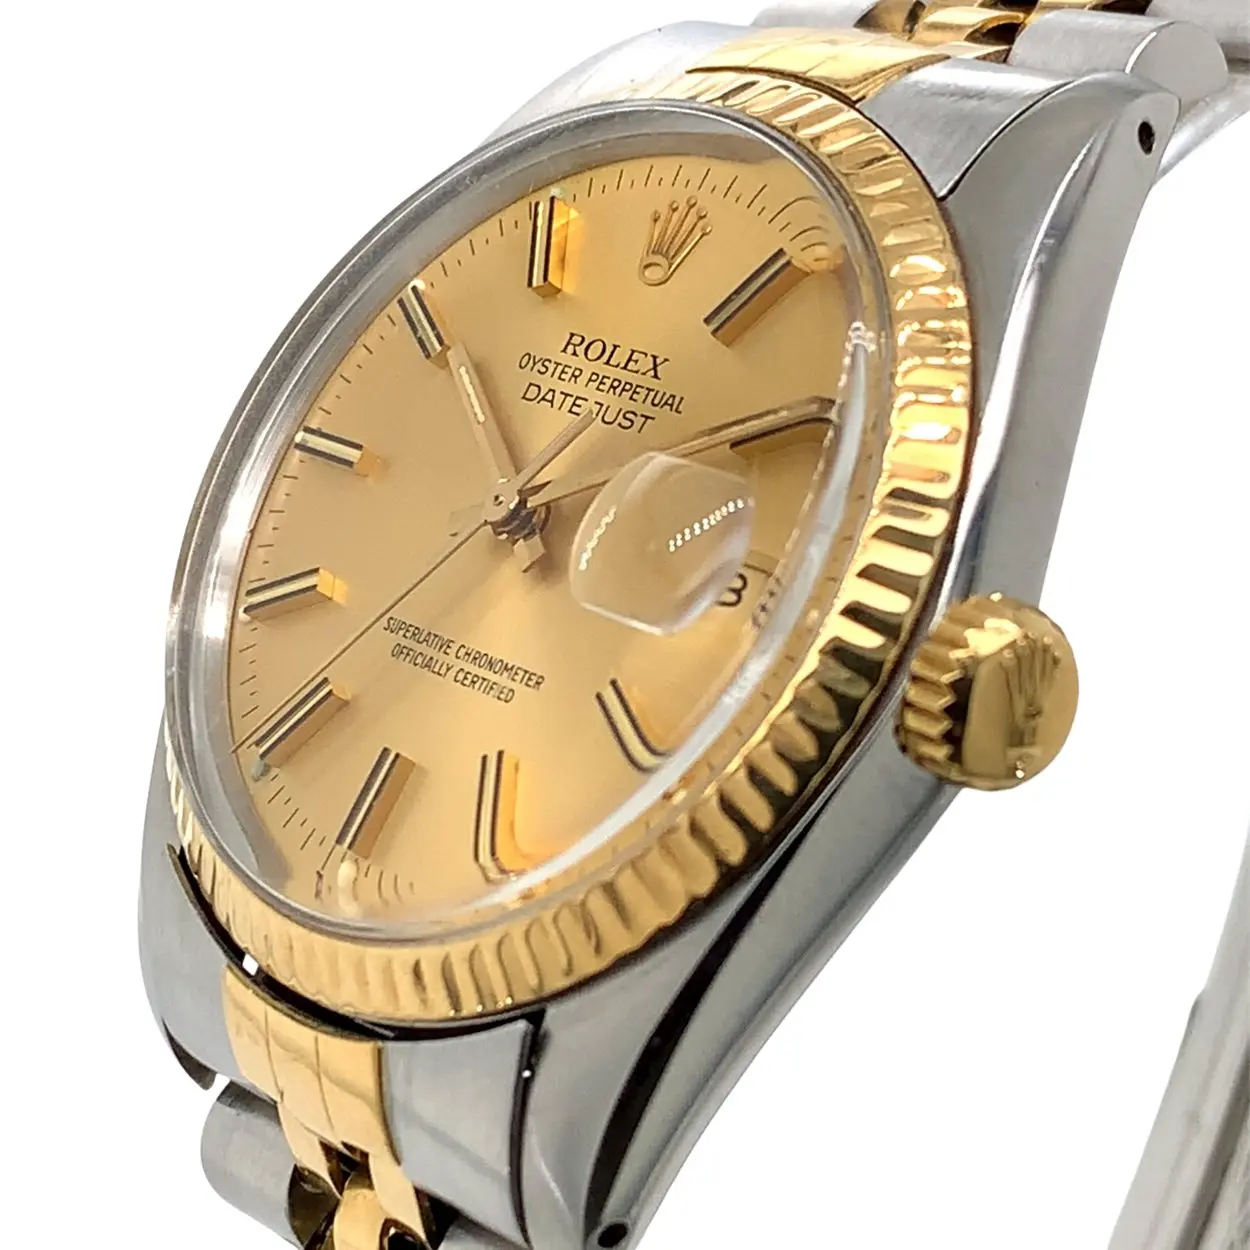 Rolex Datejust 36 16013 36mm Yellow gold and stainless steel Golden 12